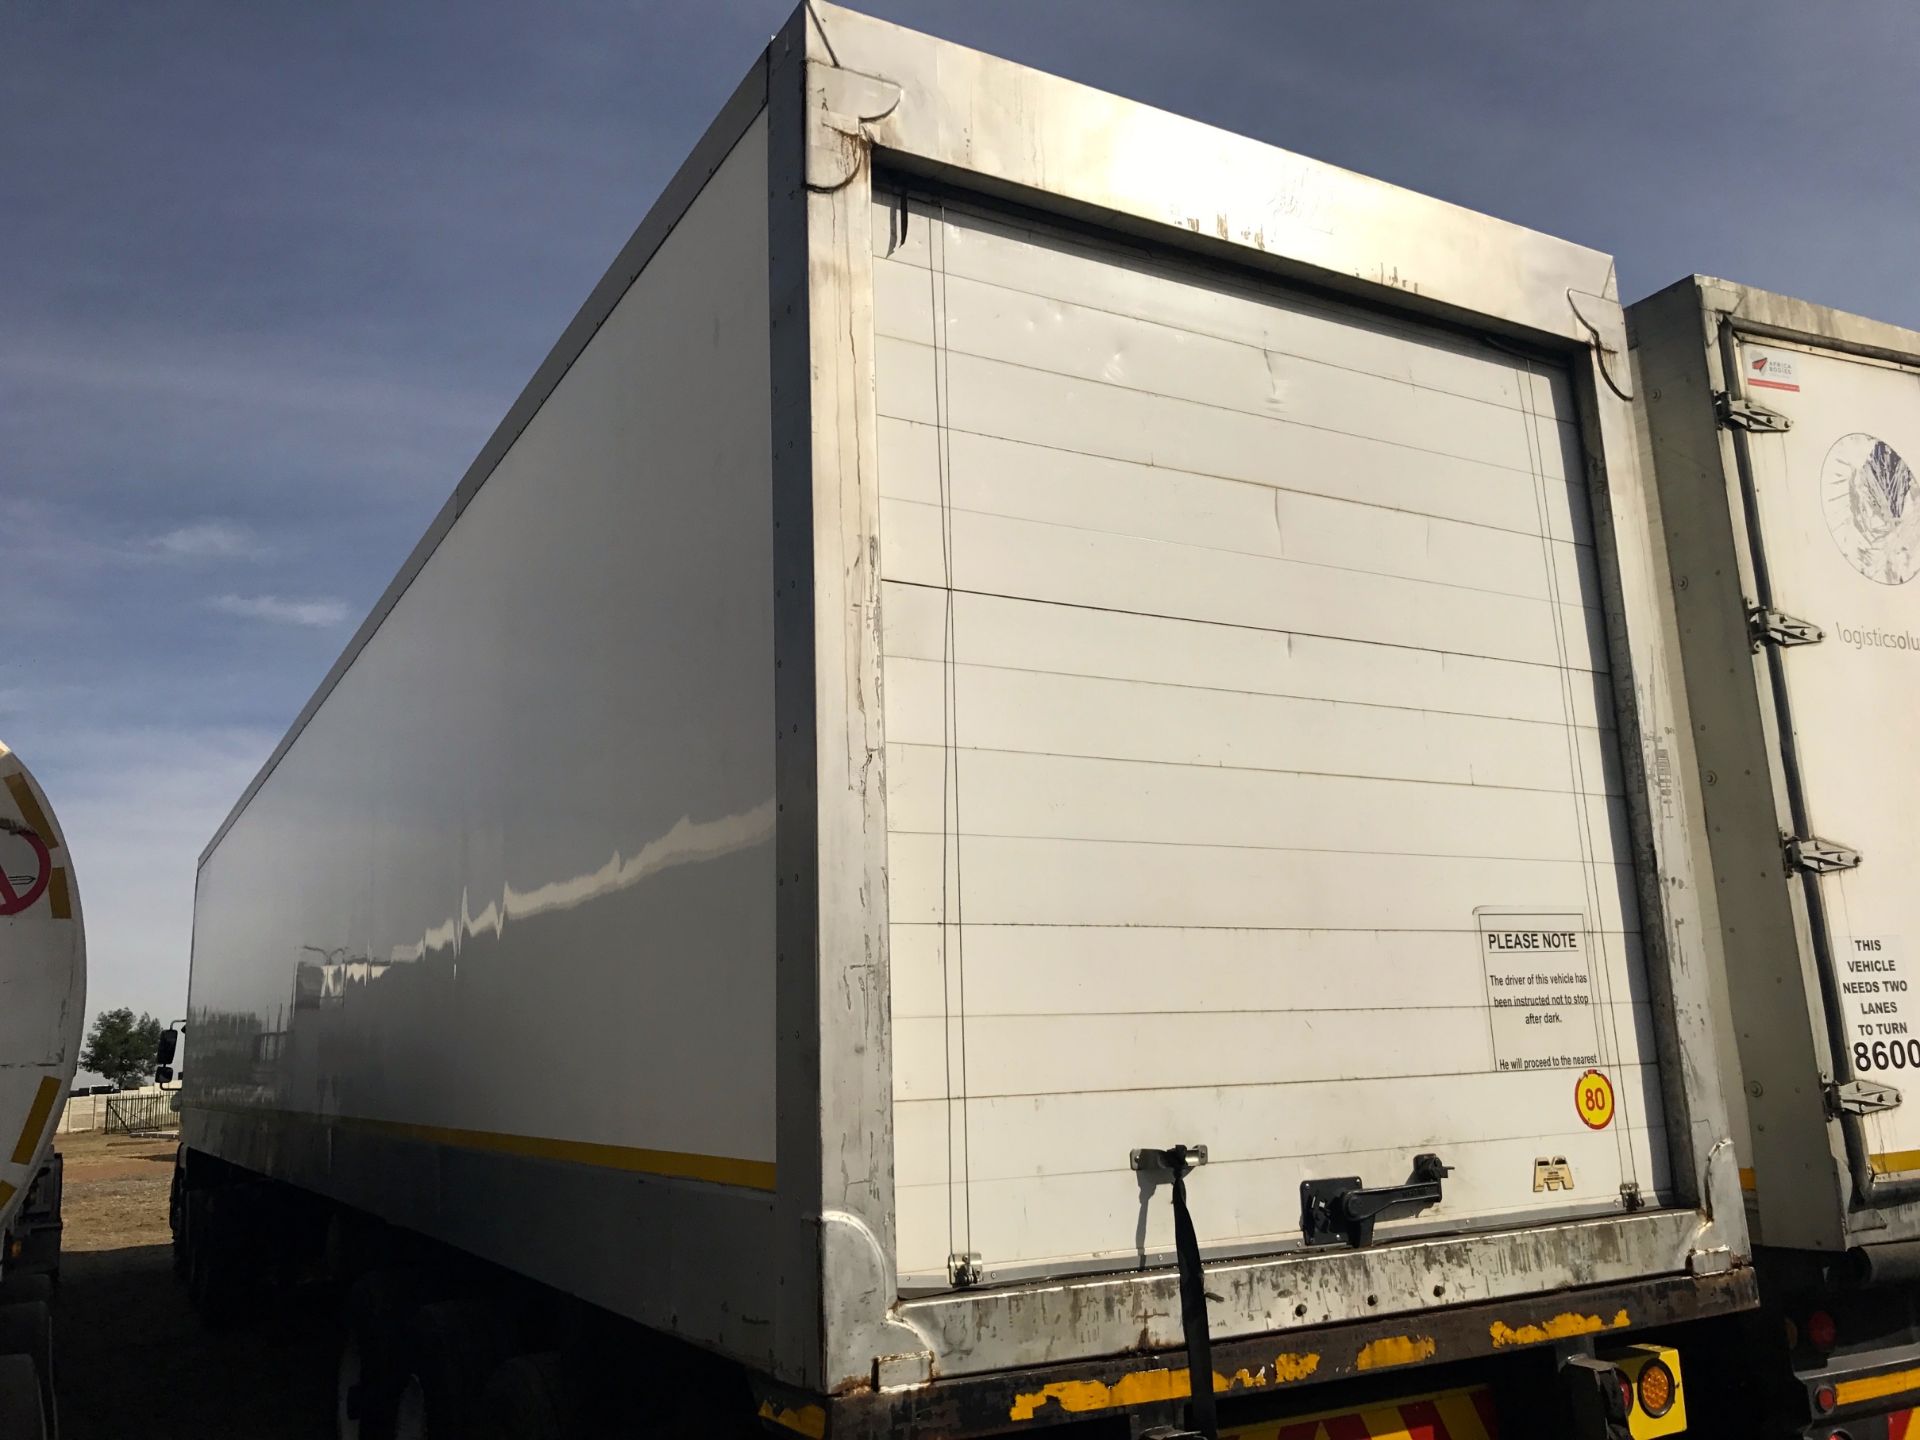 2007 ICE COLD BODIES TRI-AXLE REEFER TRAILER - (FYW159NW) - Image 2 of 2